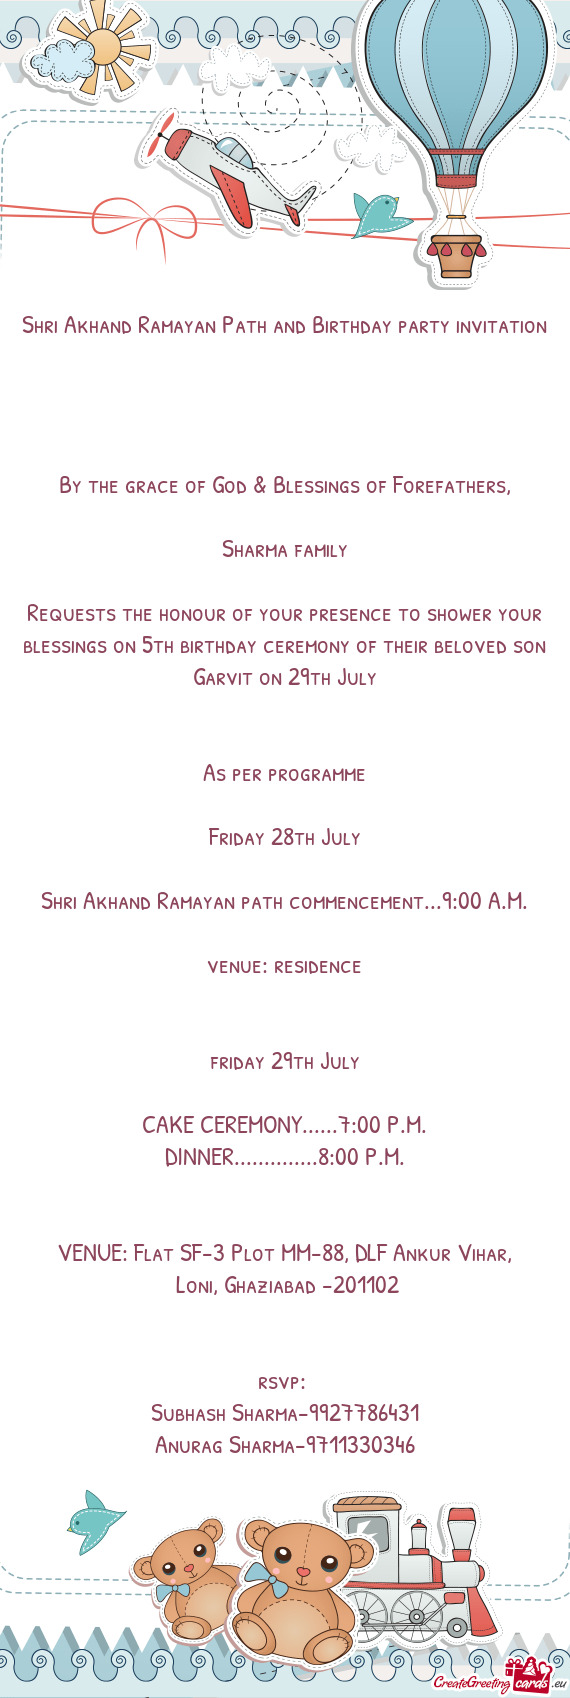 Requests the honour of your presence to shower your blessings on 5th birthday ceremony of their belo